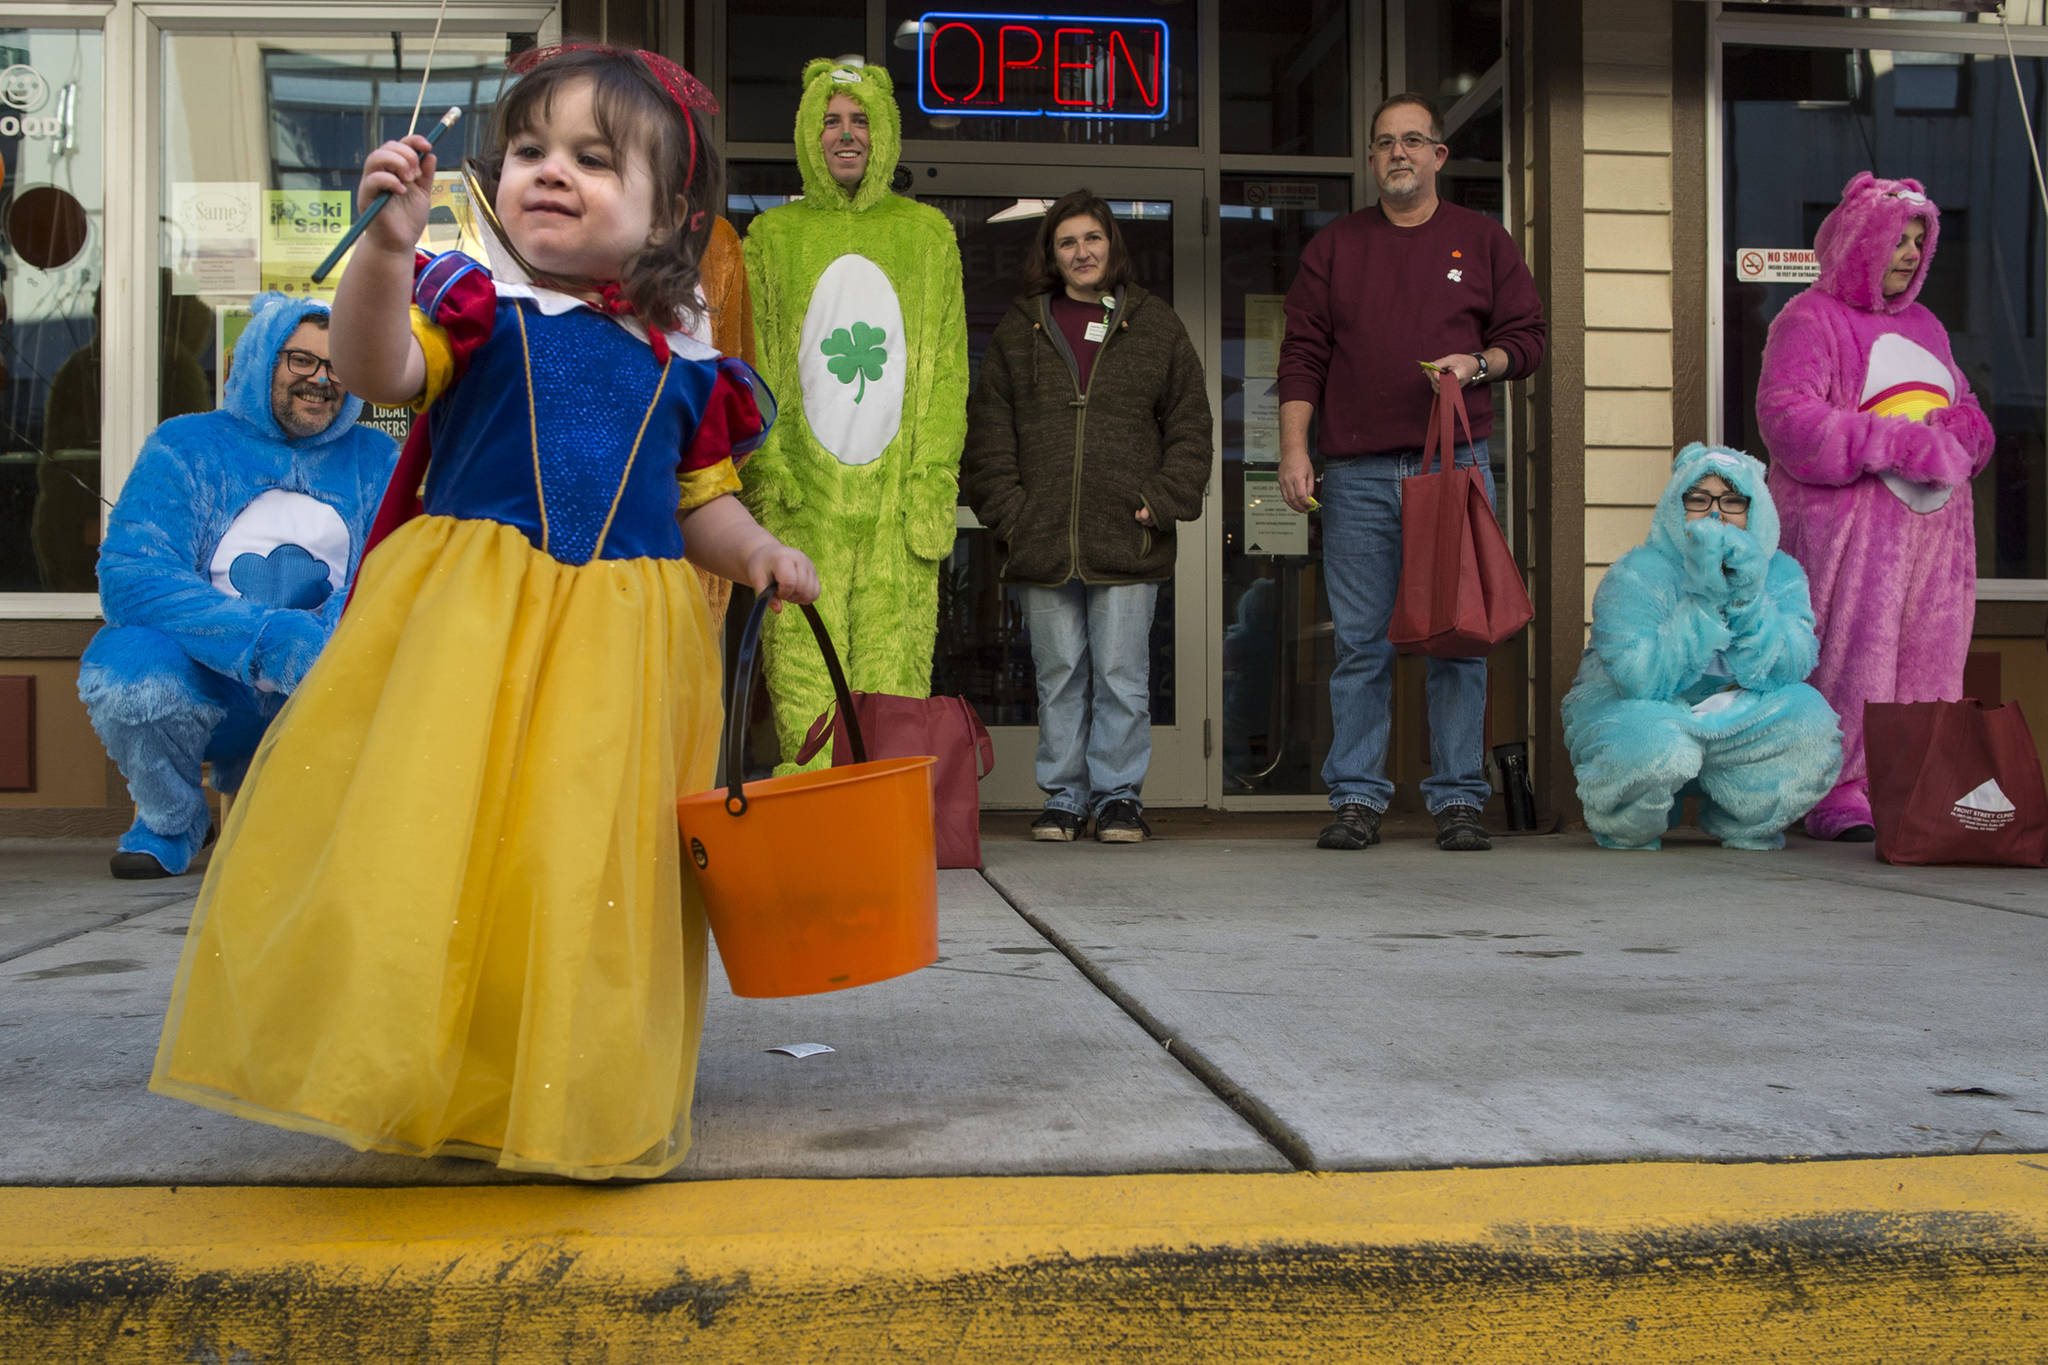 Ryelynn Wilhite examines a pencil she receives for Halloween from the employees of Front Street Clinic on Wednesday, Oct. 31, 2018. For the fourth year Kindred Post has organized the Halloween celebration for trick-or-treaters. (Michael Penn | Juneau Empire)